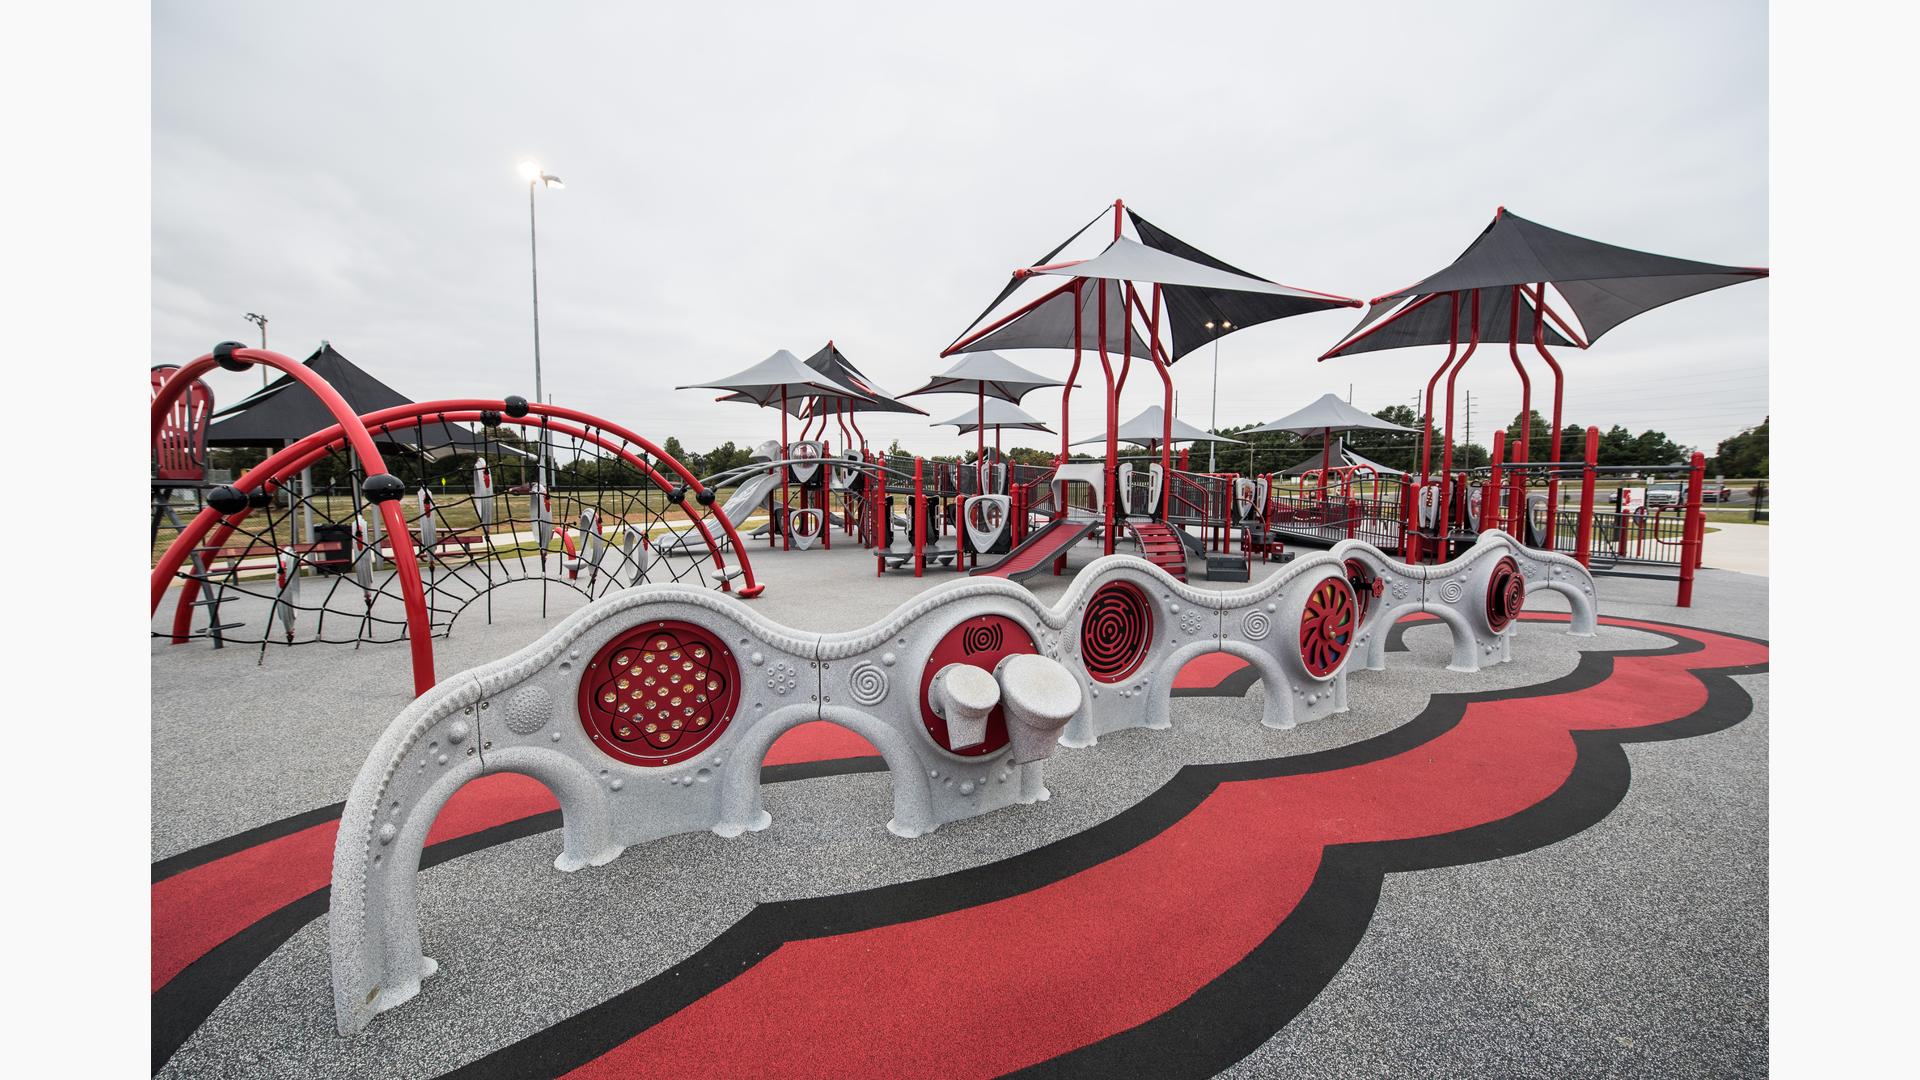 All inclusive playground featuring Evos and PlayBooster equipment. The playground has a custom surface and shade coverings over each of the play structures.